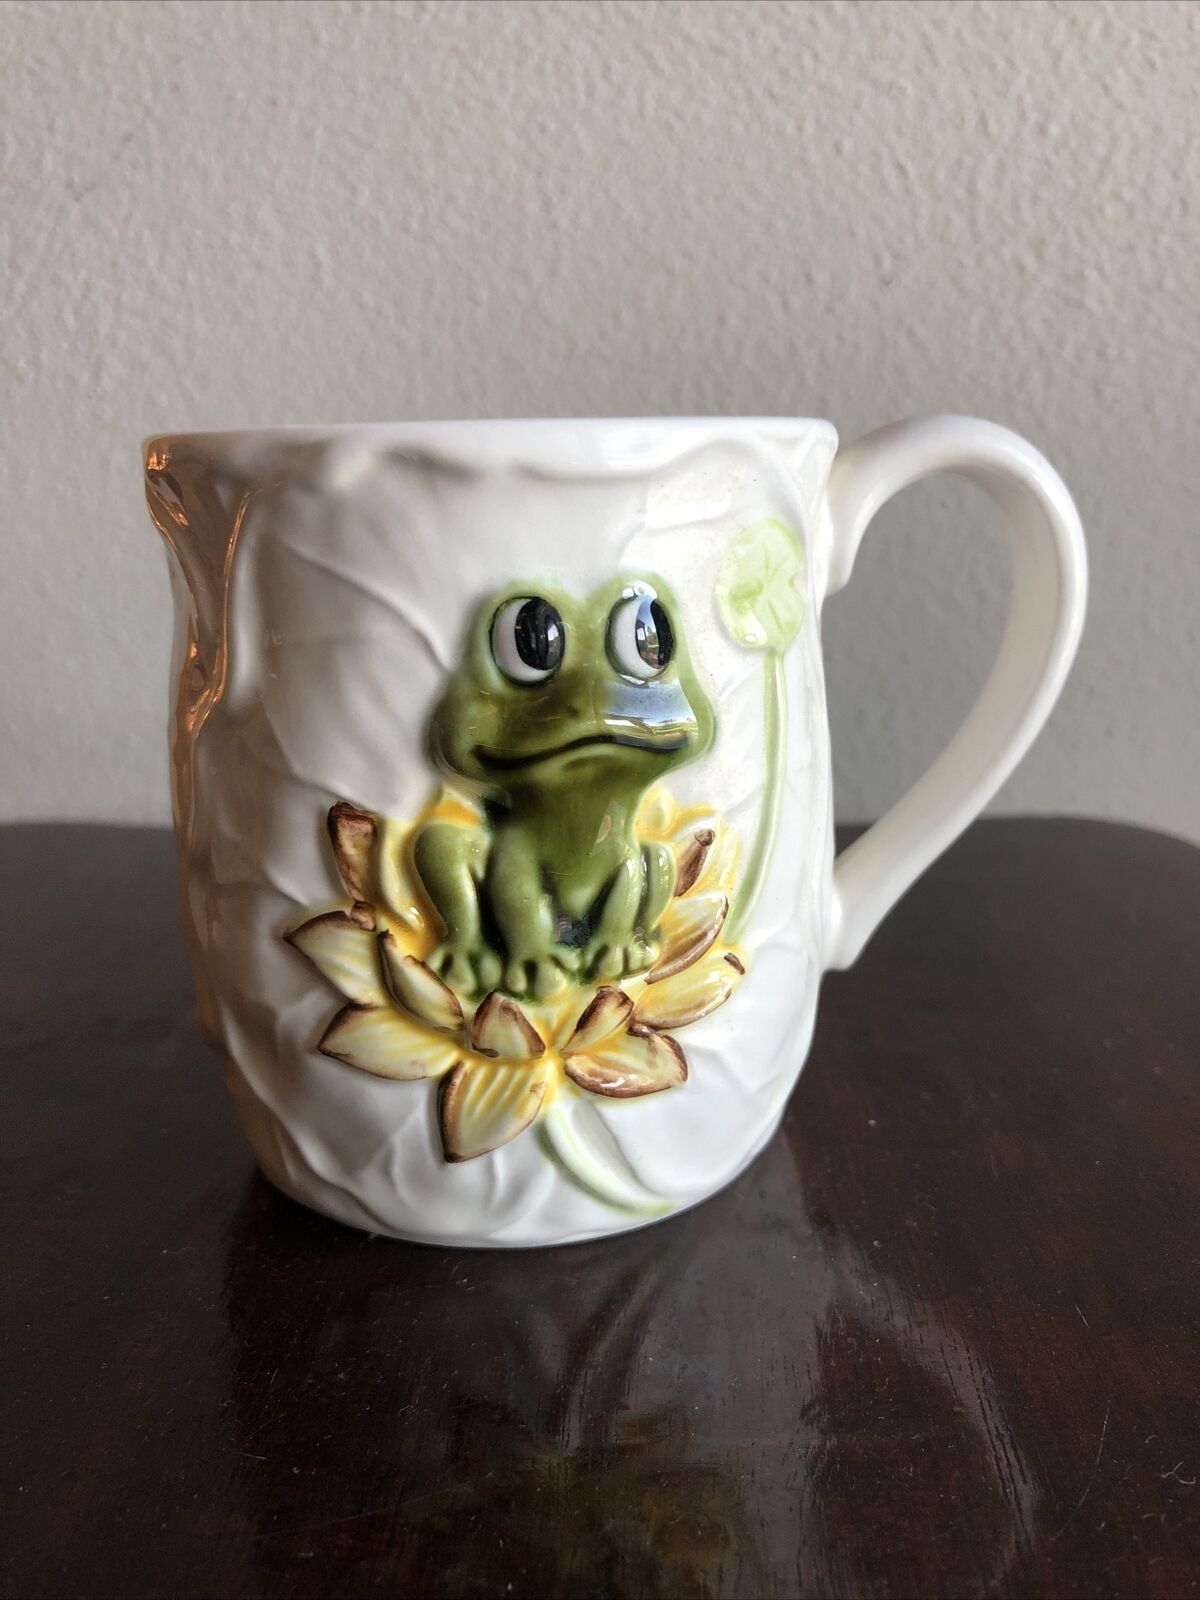 Vintage Sears Roebuck & Co 1976 Neil The Frog Mug Cup Made in Japan WITH FLAWS